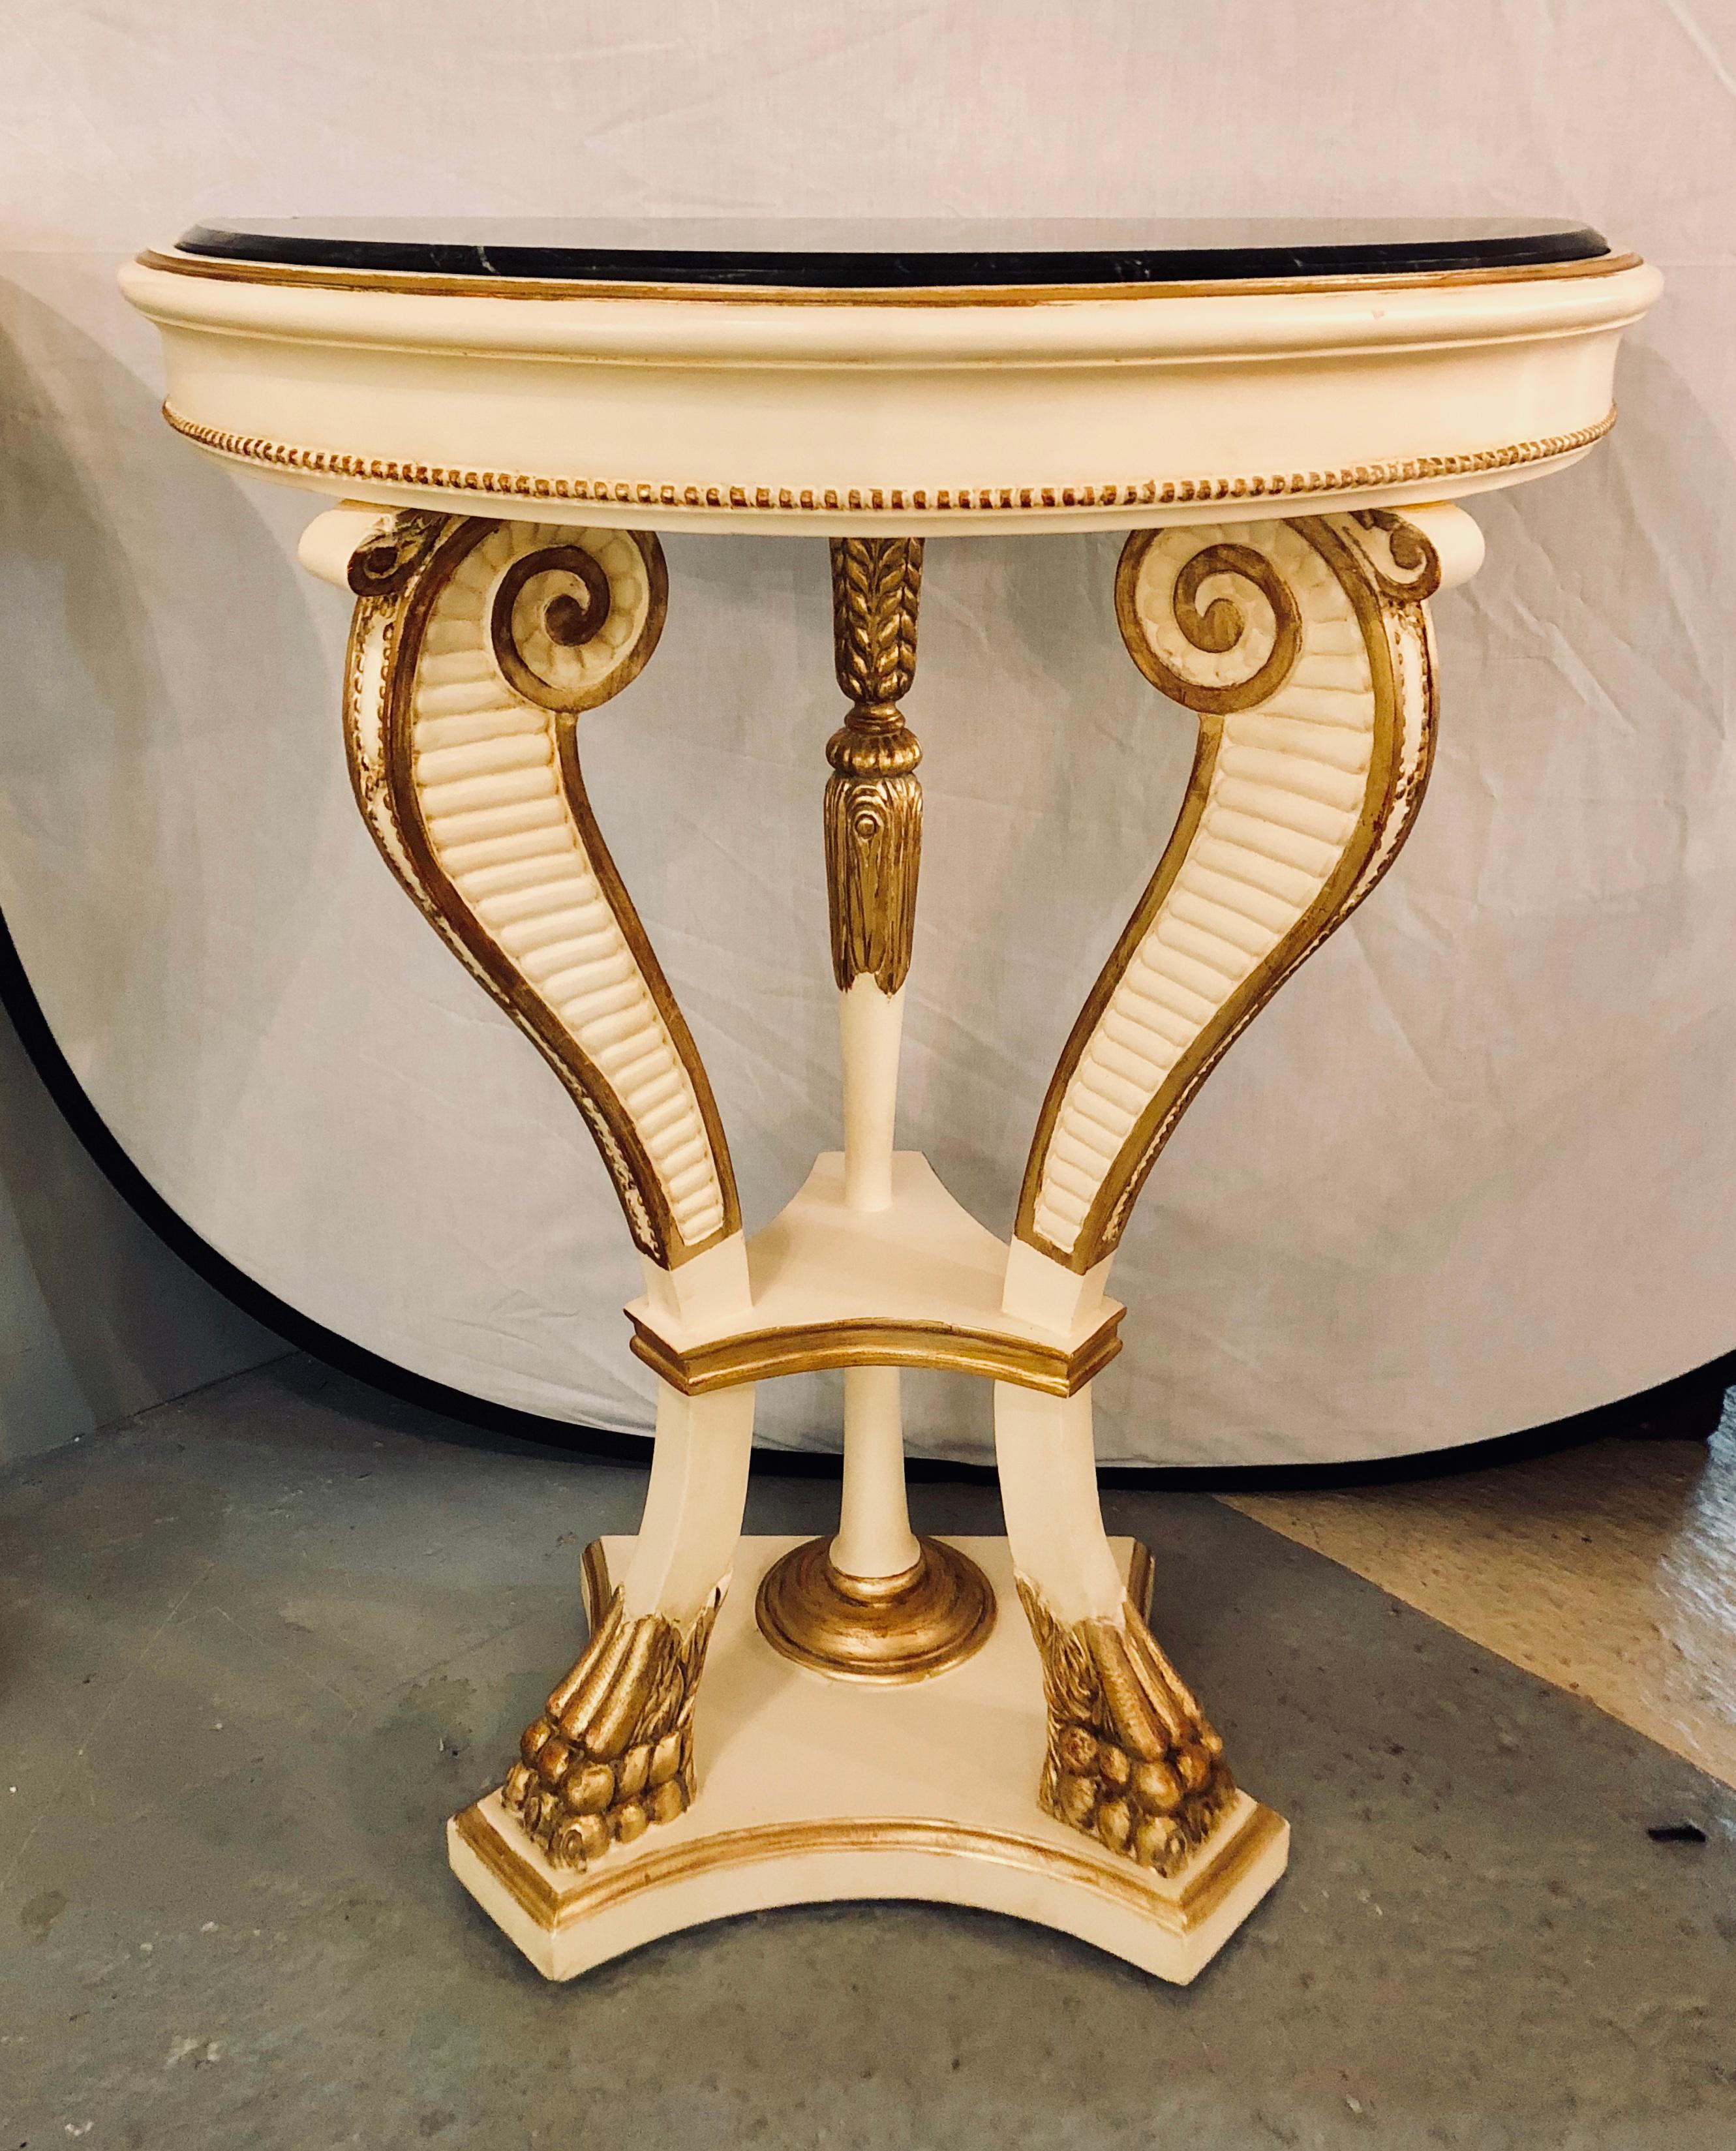 A pair of parcel paint and gilt decorated marble top demilune console tables with claw feet. Each having a linen white painted background with a gilt gold design having a black marble top in the demilune form. Supported by scroll reeded legs.